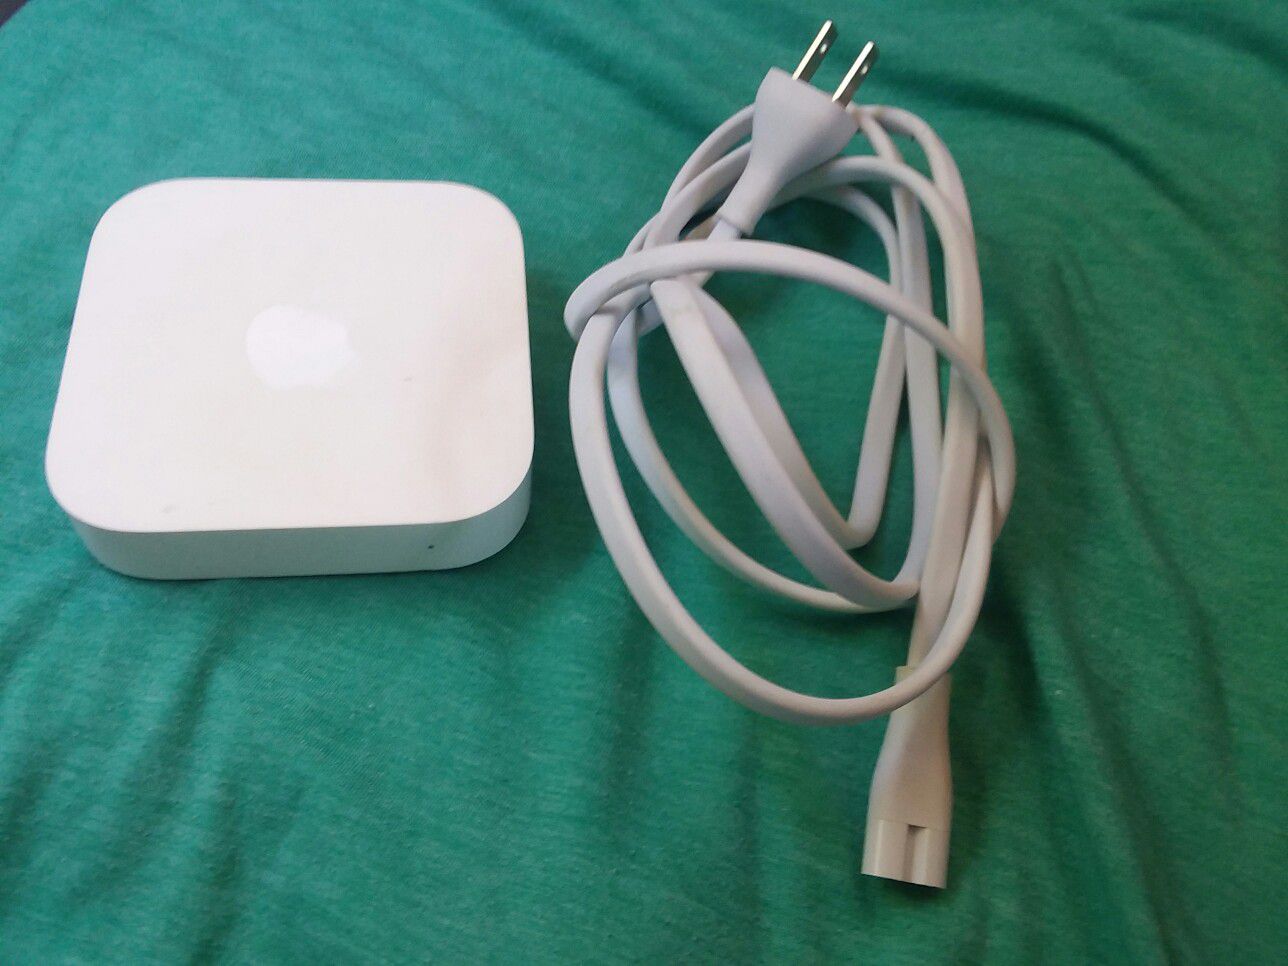 Apple A1392 AirPort Express Base Wireless Router